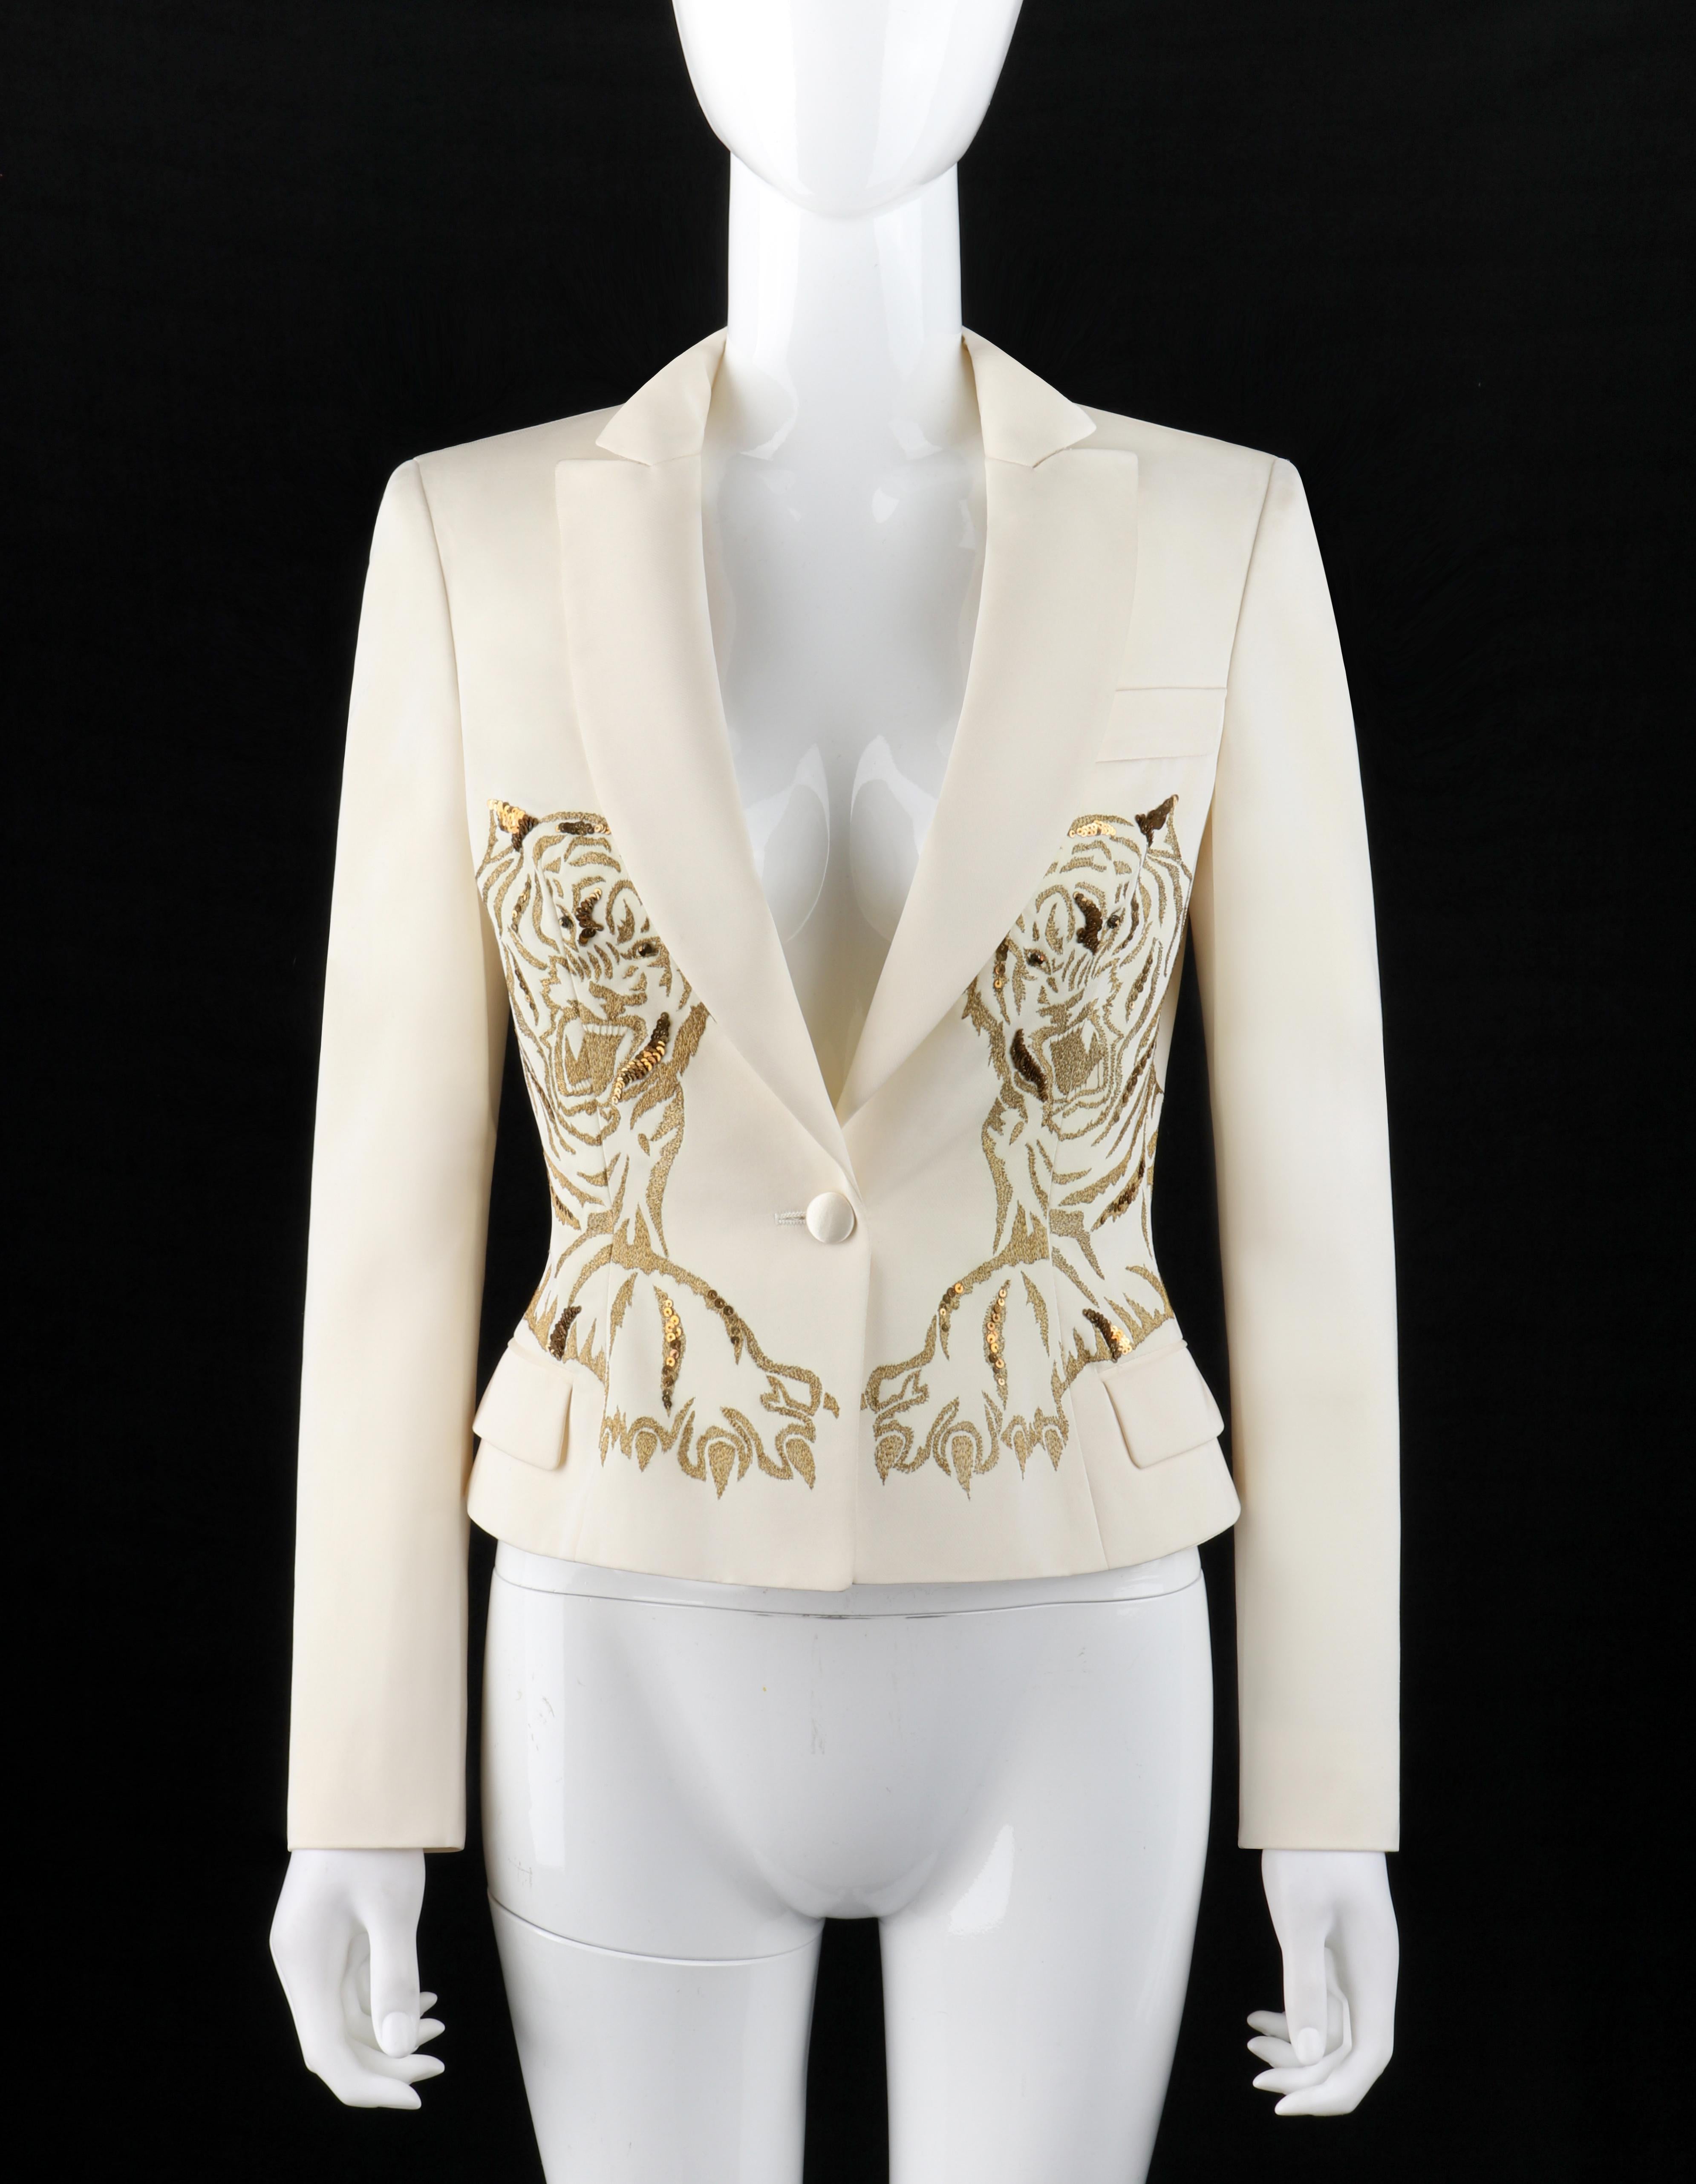 This beautifully embroidered tiger blazer with sequin and bead detailing was from Alexander McQueen's Egyptian inspired F/W 2007 collection 